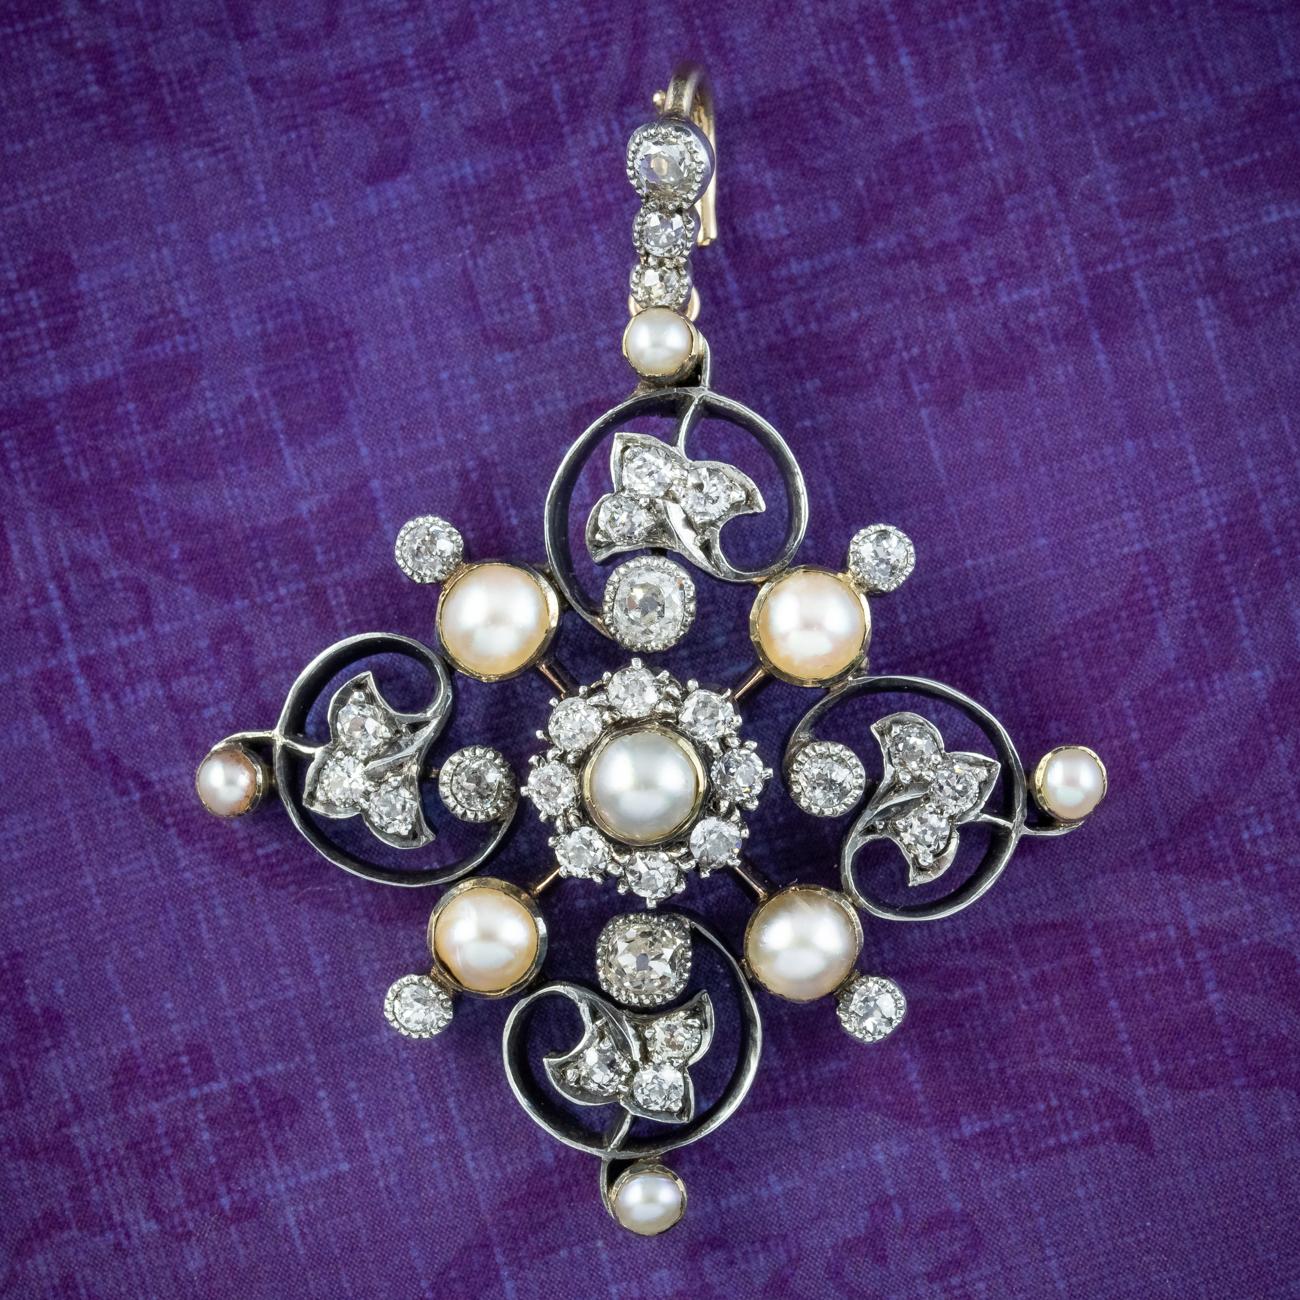 A stunning antique Art Nouveau pendant from the late Victorian era (Circa 1900) decorated with nine lustrous natural pearls and glistening old mine cut diamonds that total approx. 1.5ct. 

Pearls are the birthstone of June and a true treasure of the